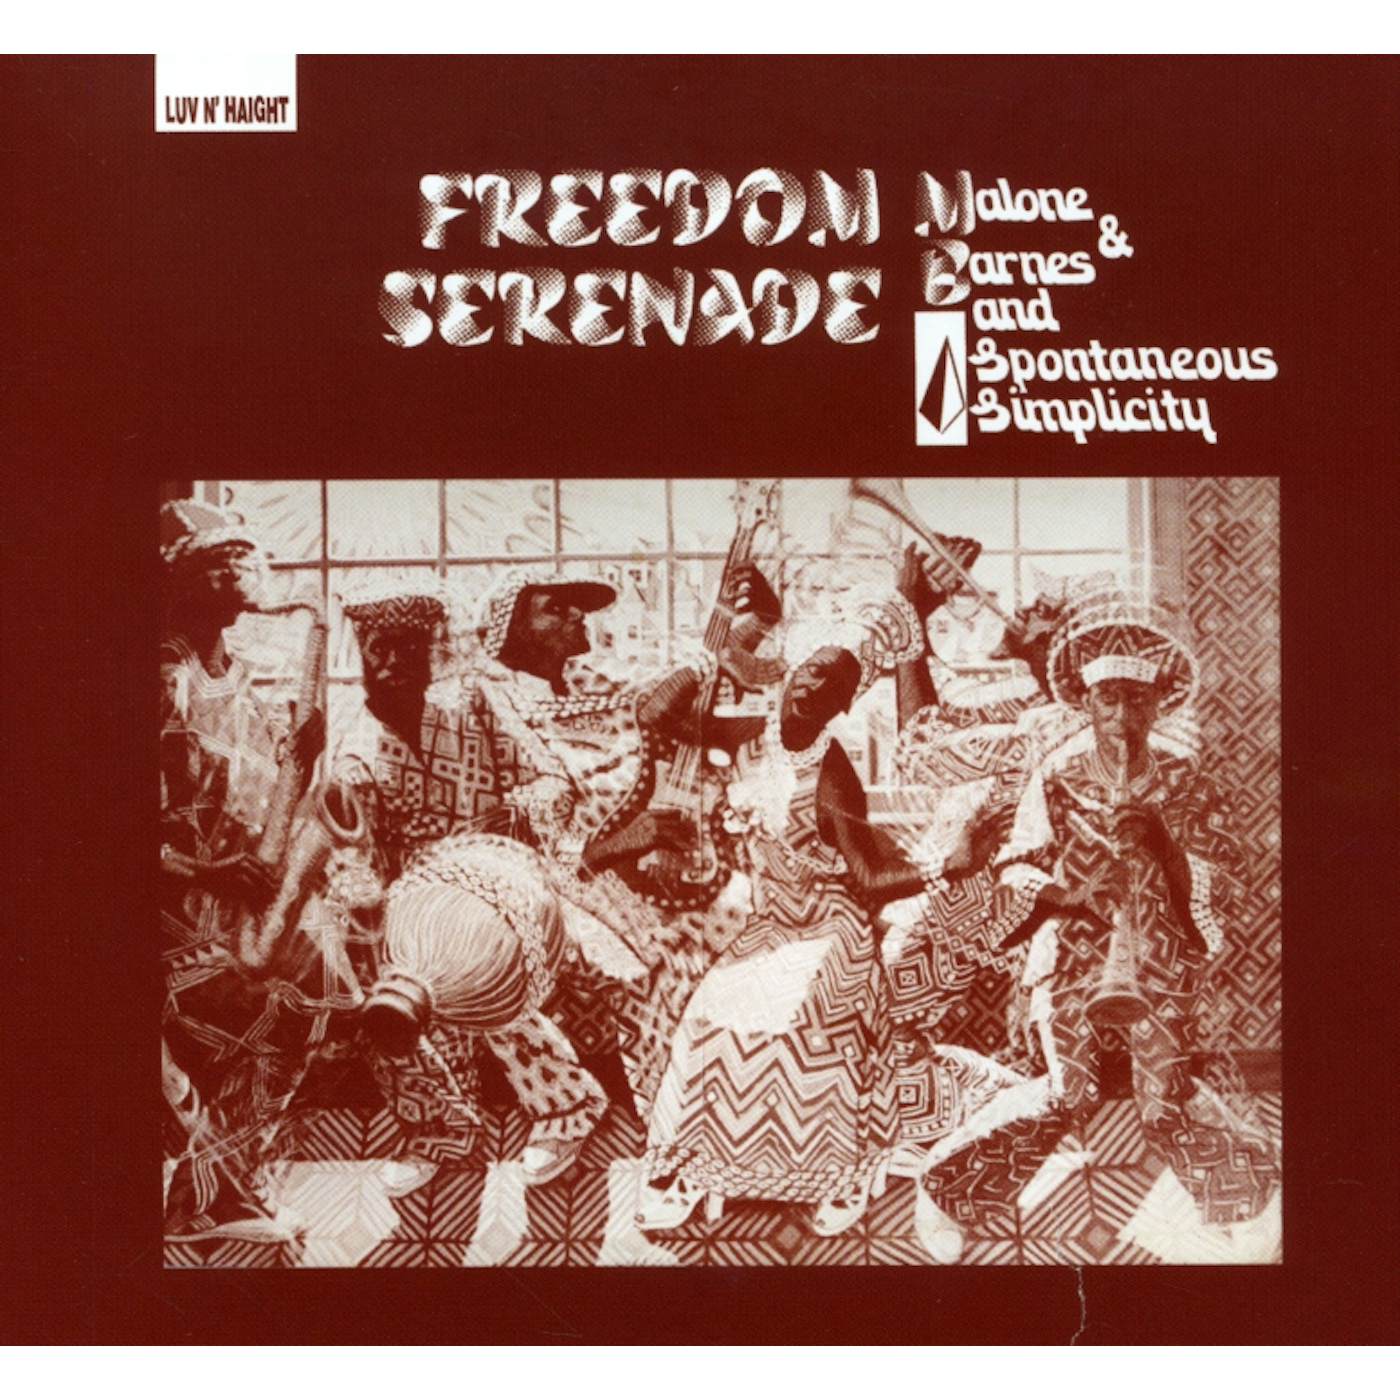 Malone & Barnes and Spontaneous Simplicity FREEDOM SERENADE CD